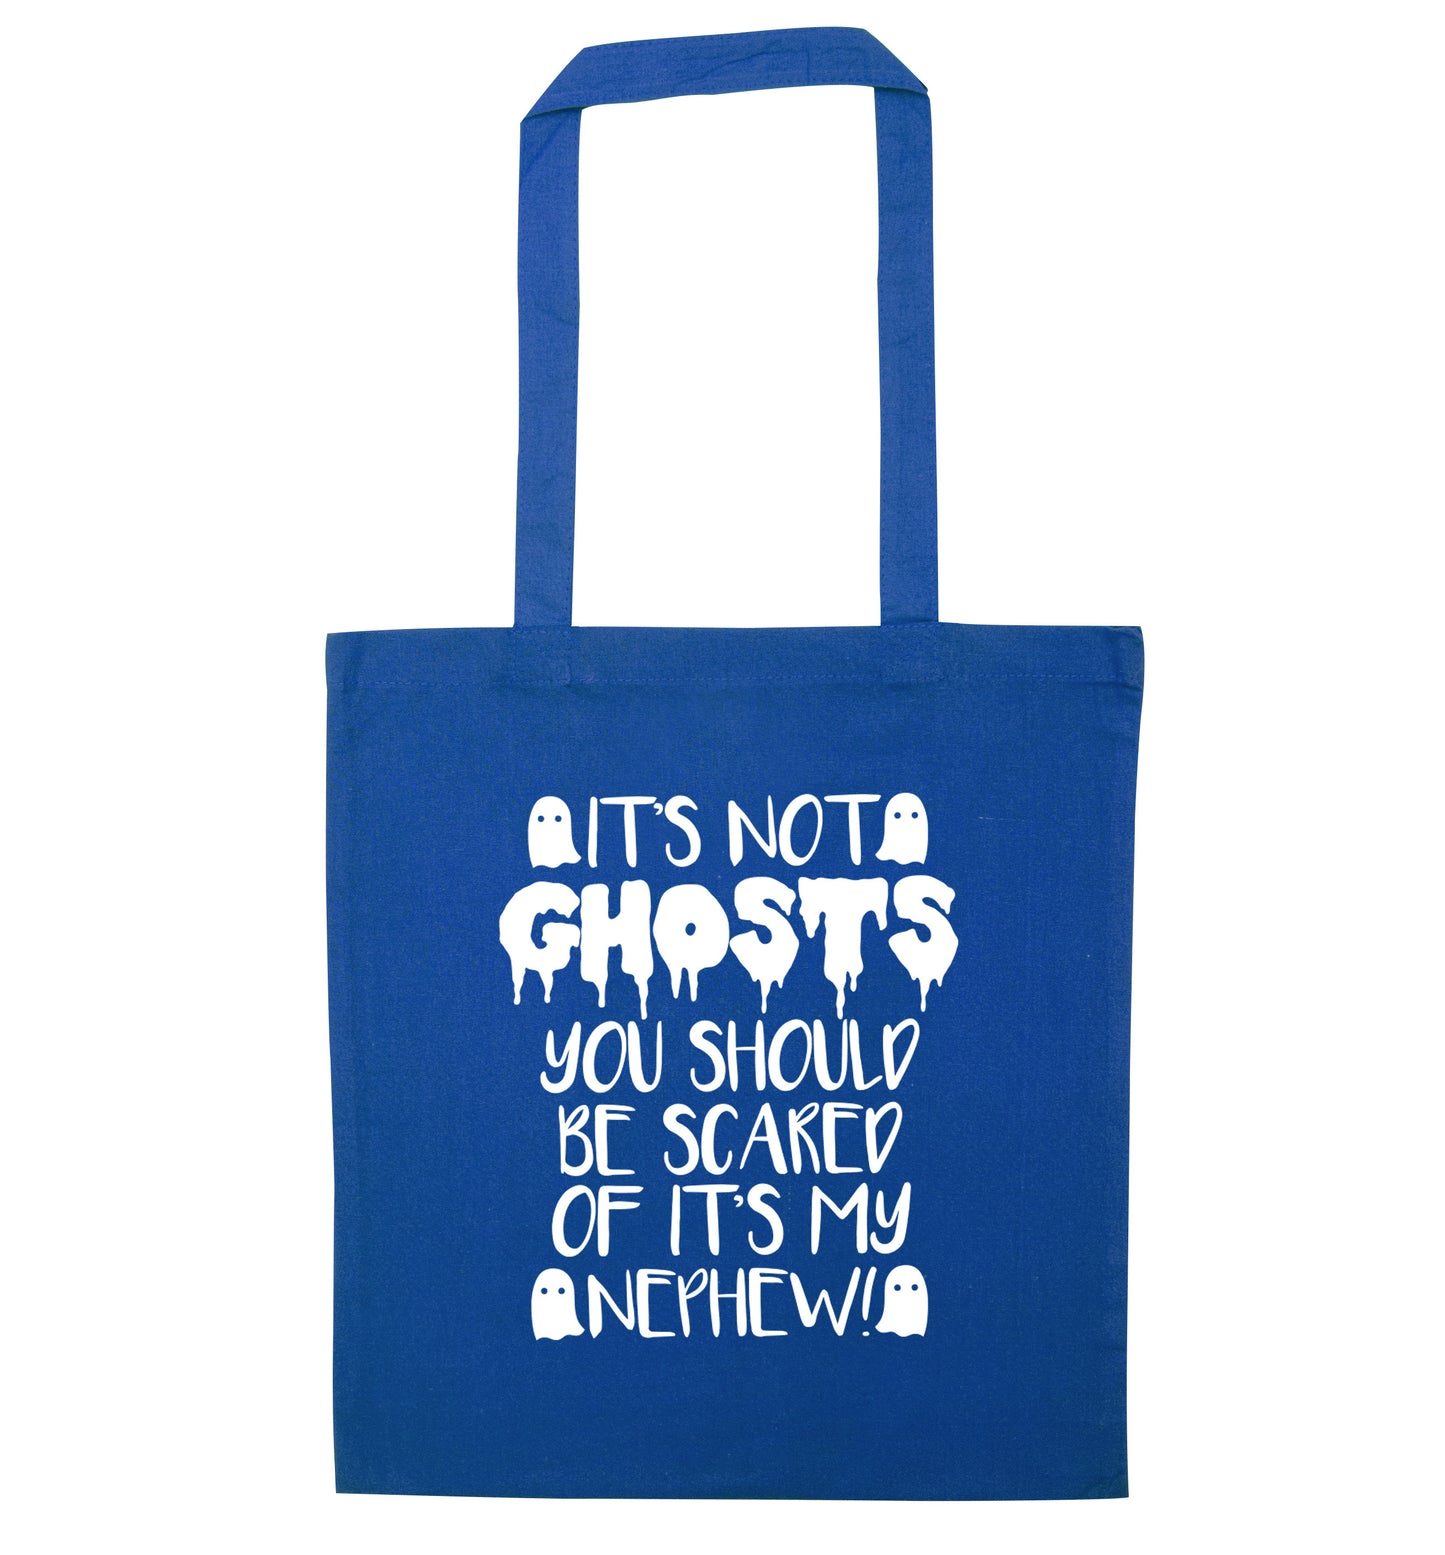 It's not ghosts you should be scared of it's my nephew! blue tote bag